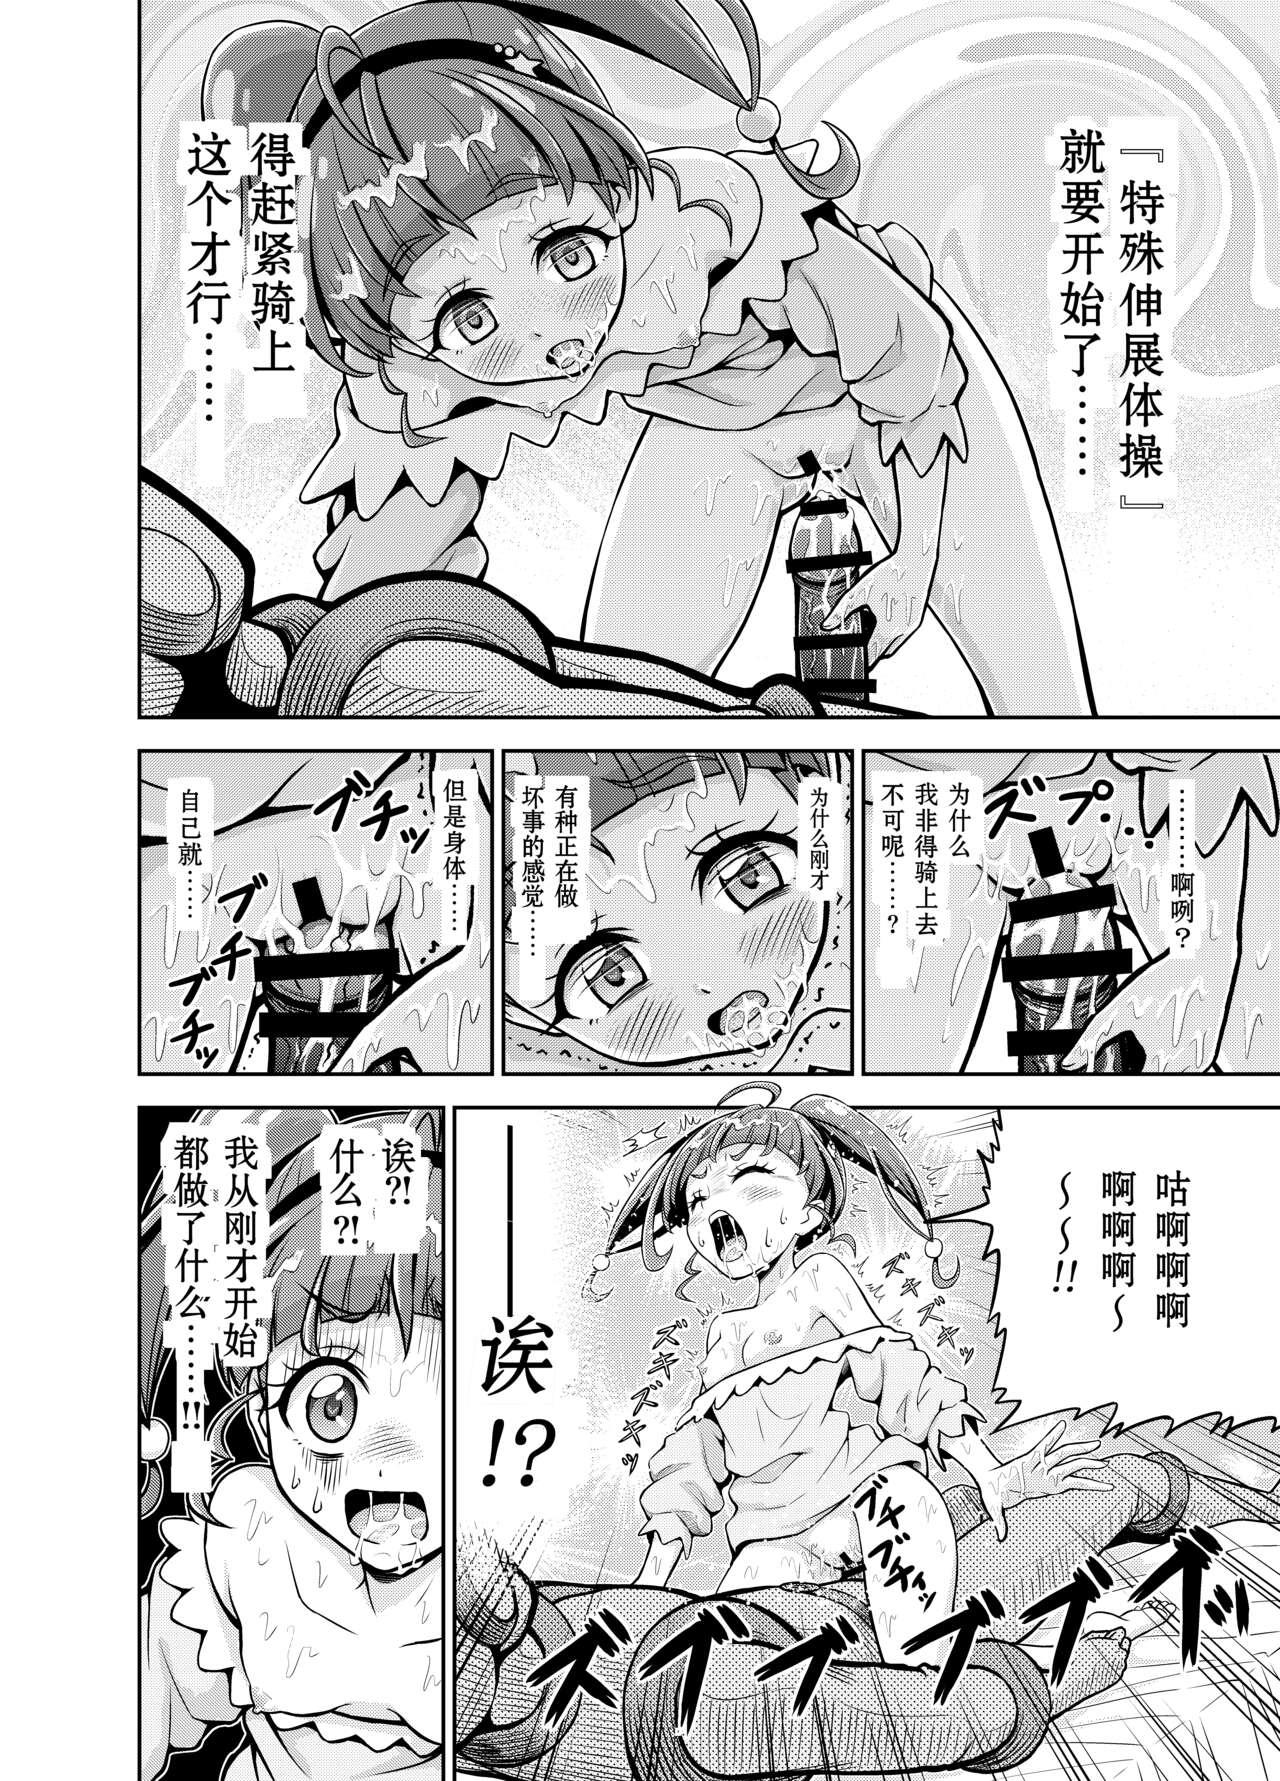 Horny Hoshi Asobi - Star twinkle precure Brunettes - Page 7